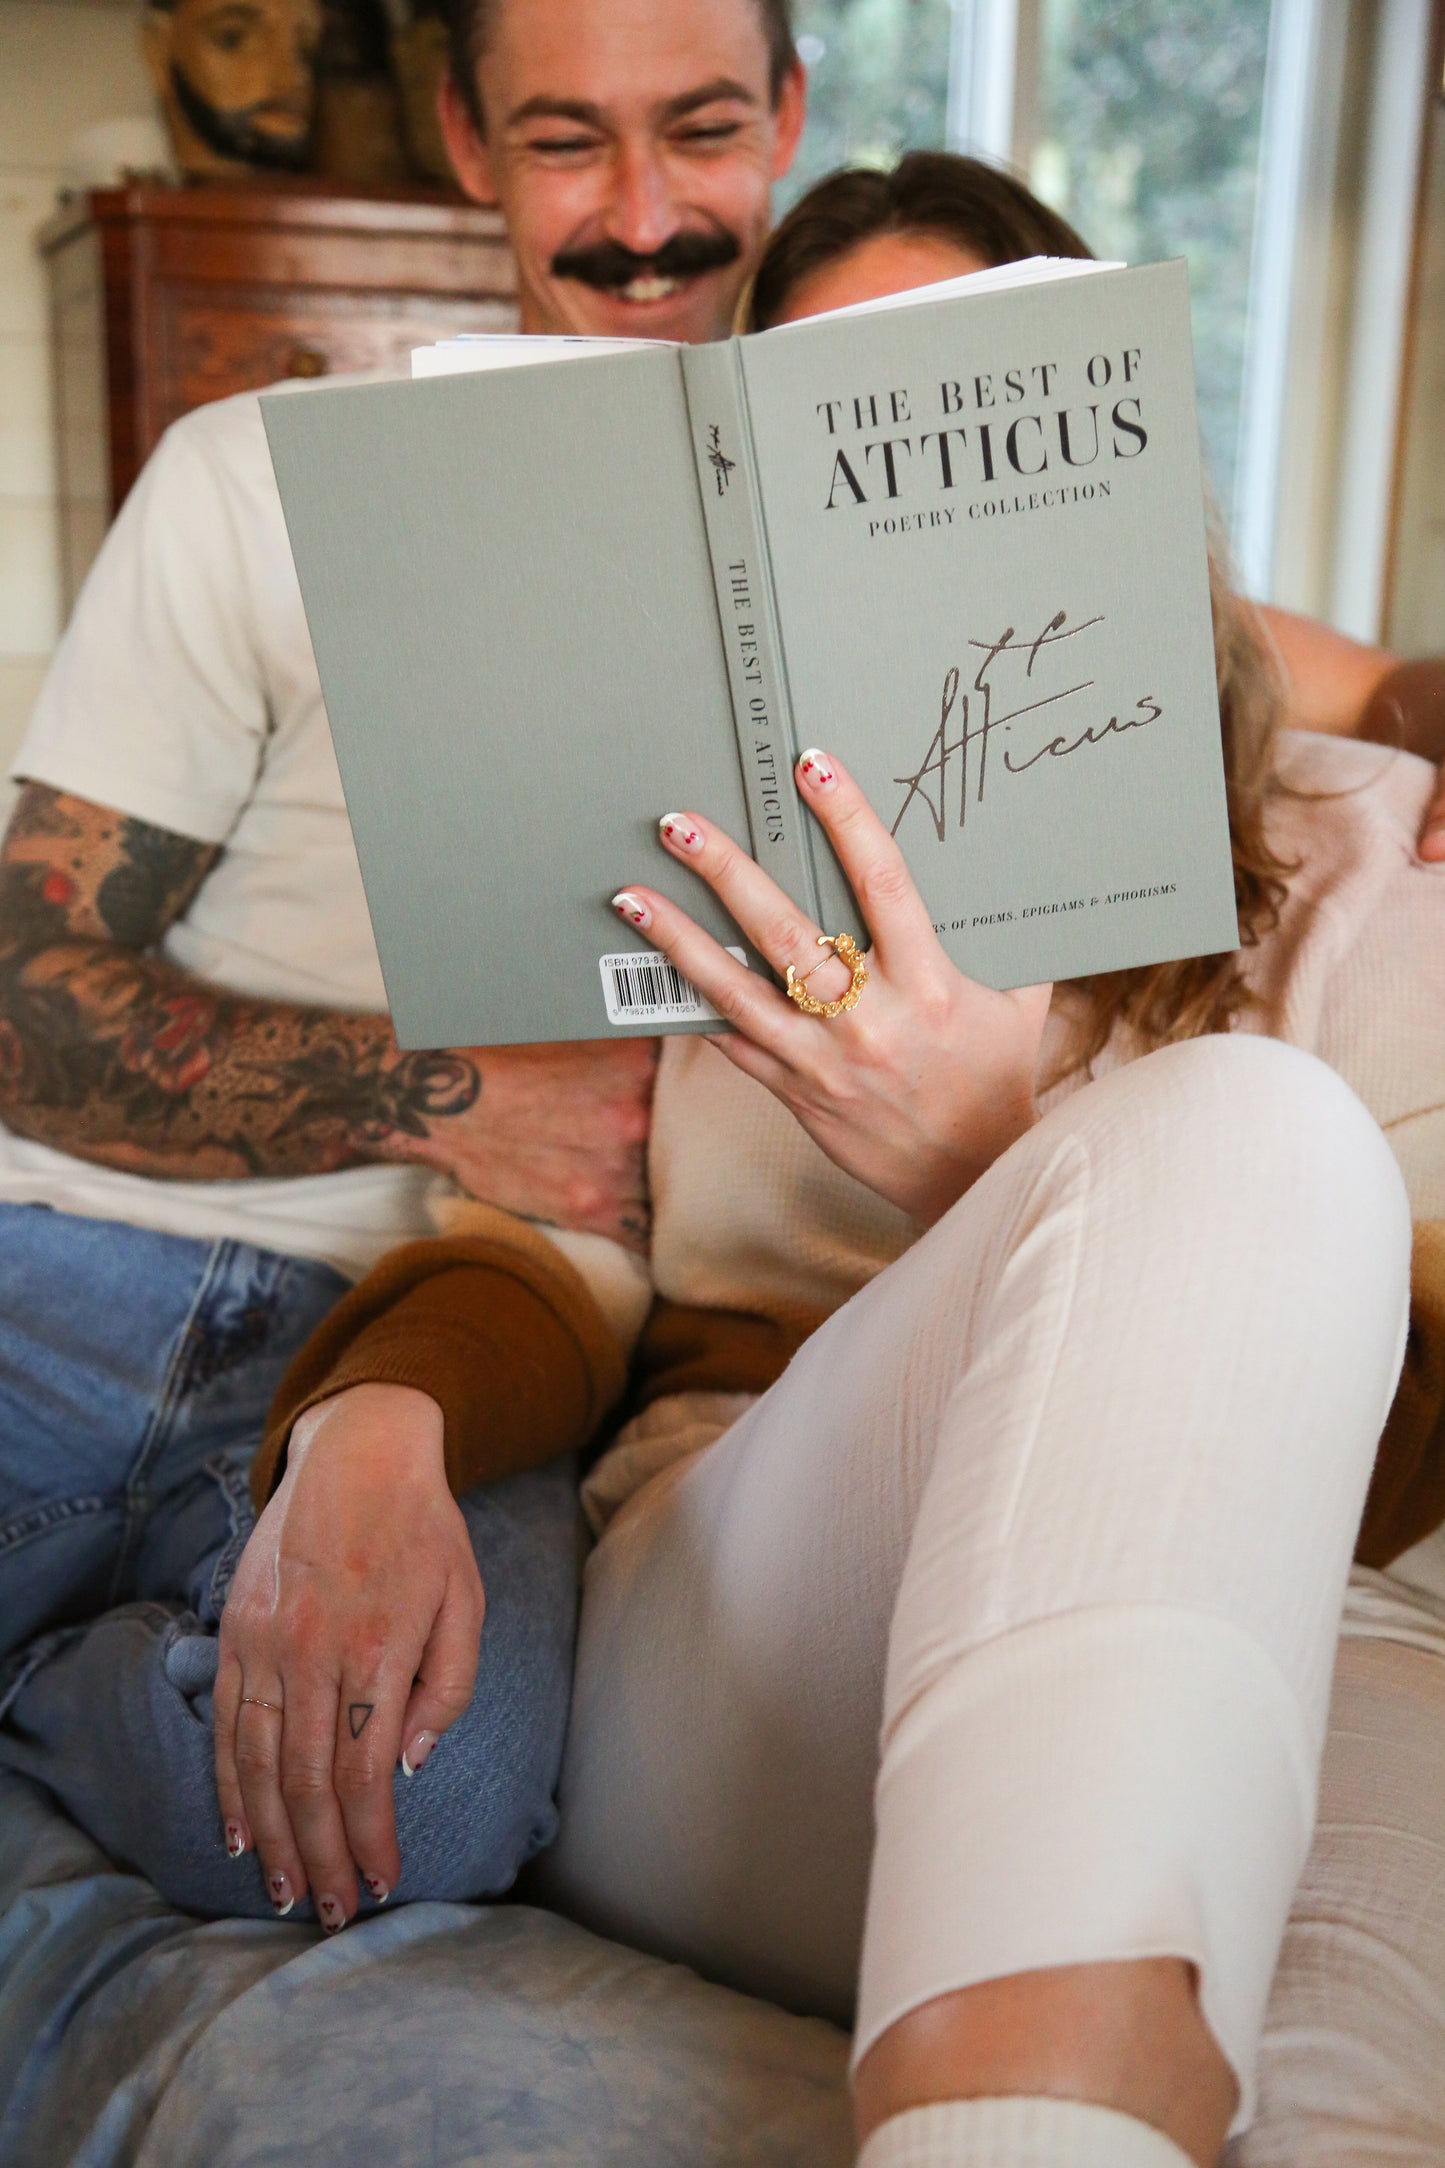 Official Signed Copy of The Best Of Atticus Poetry Collection